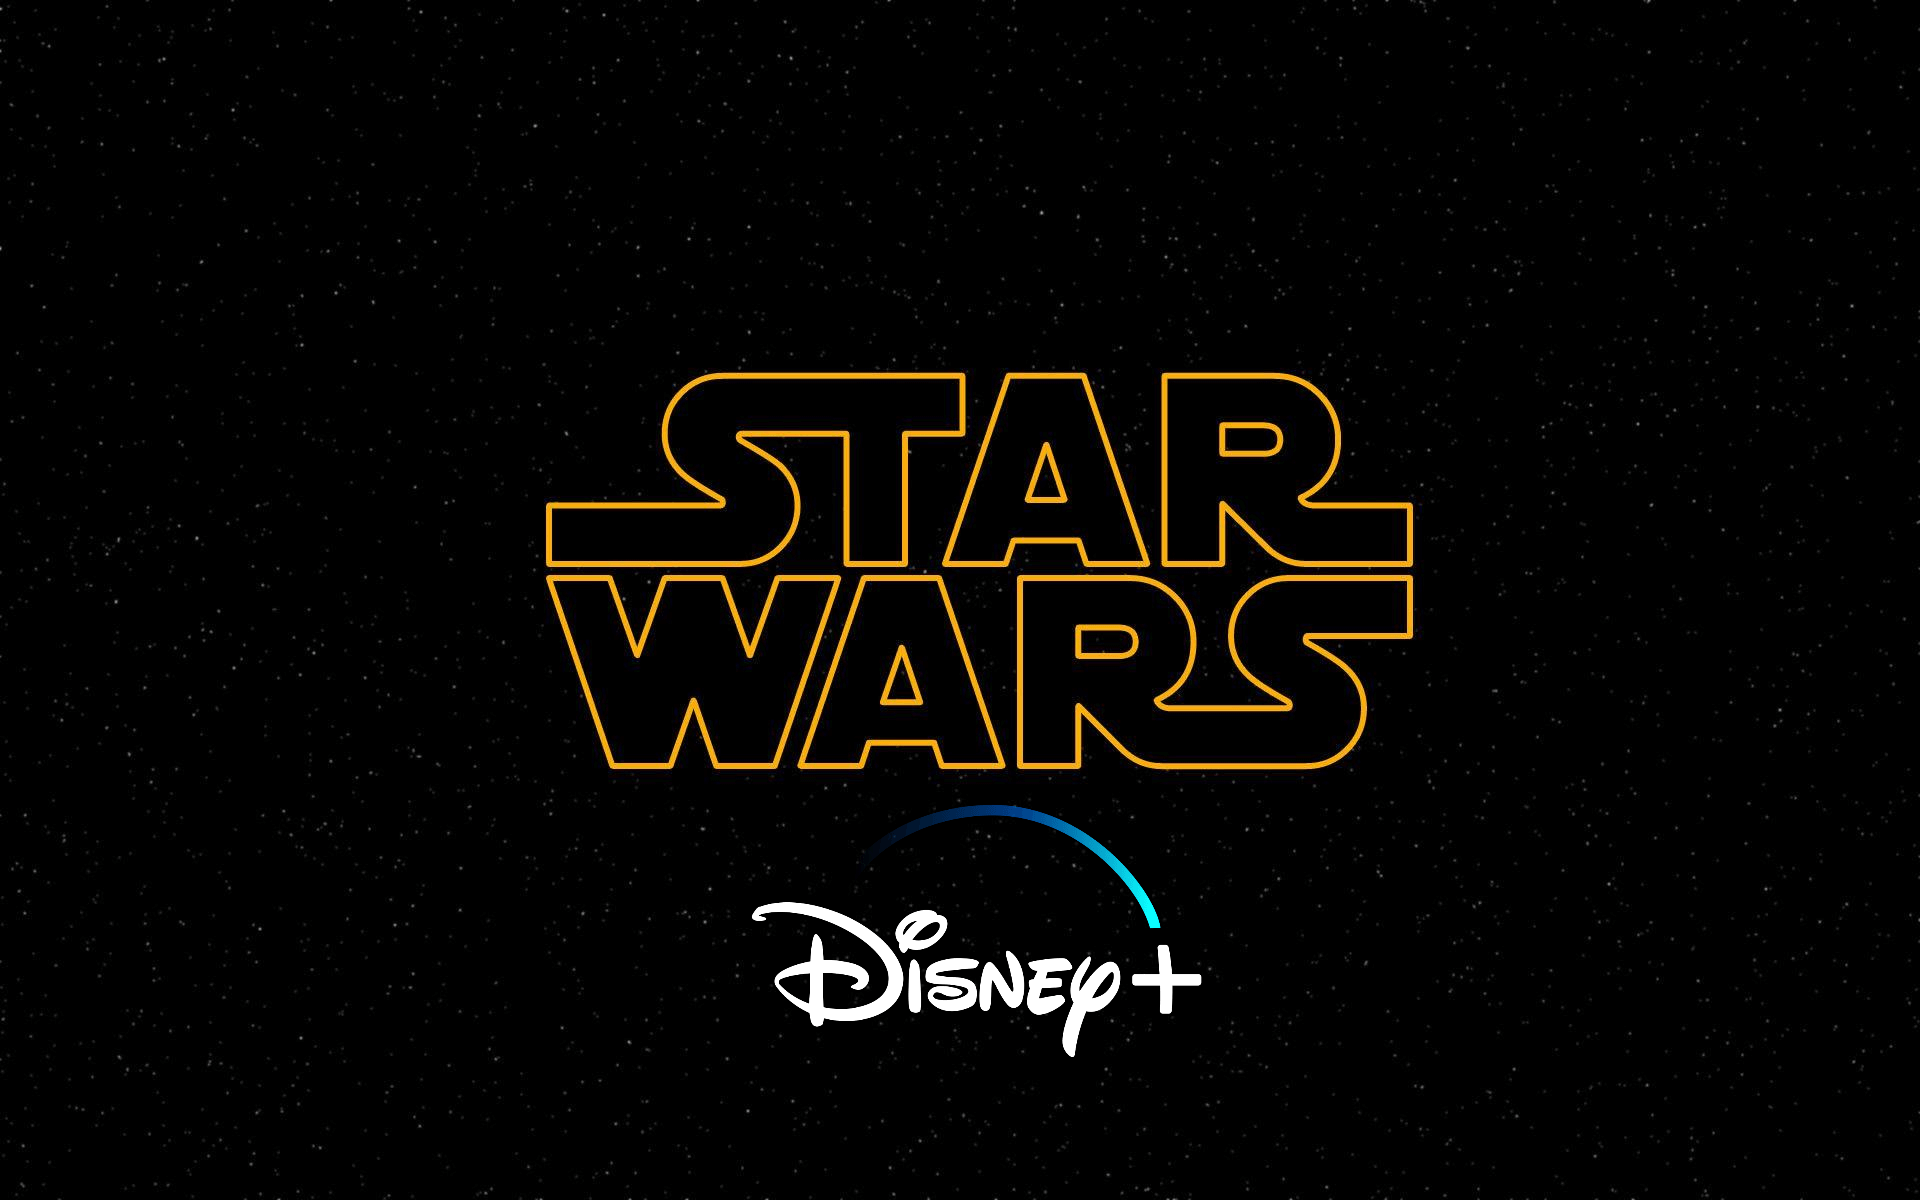 Disney+ Has More Star Wars Series In Development, With Theatrical Films Taking a Hiatus After ‘The Rise of Skywalker’ Says Bob Iger